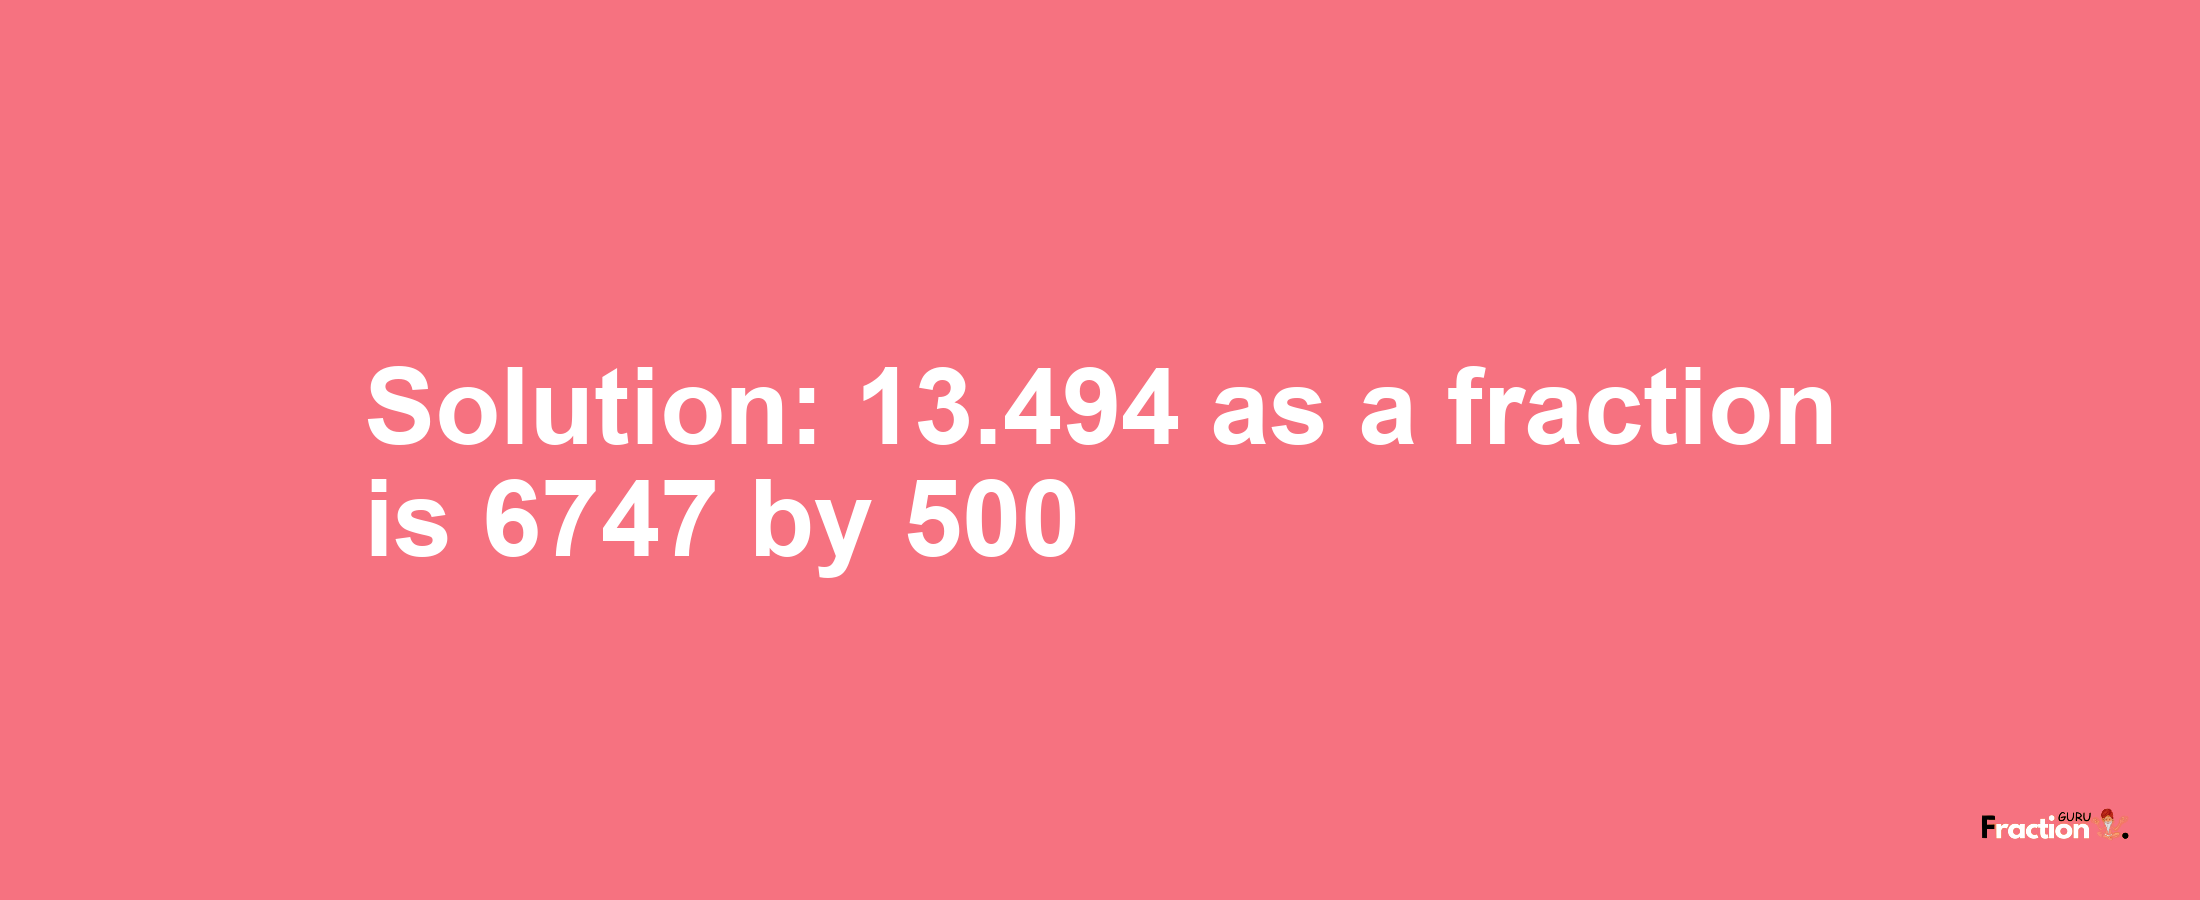 Solution:13.494 as a fraction is 6747/500